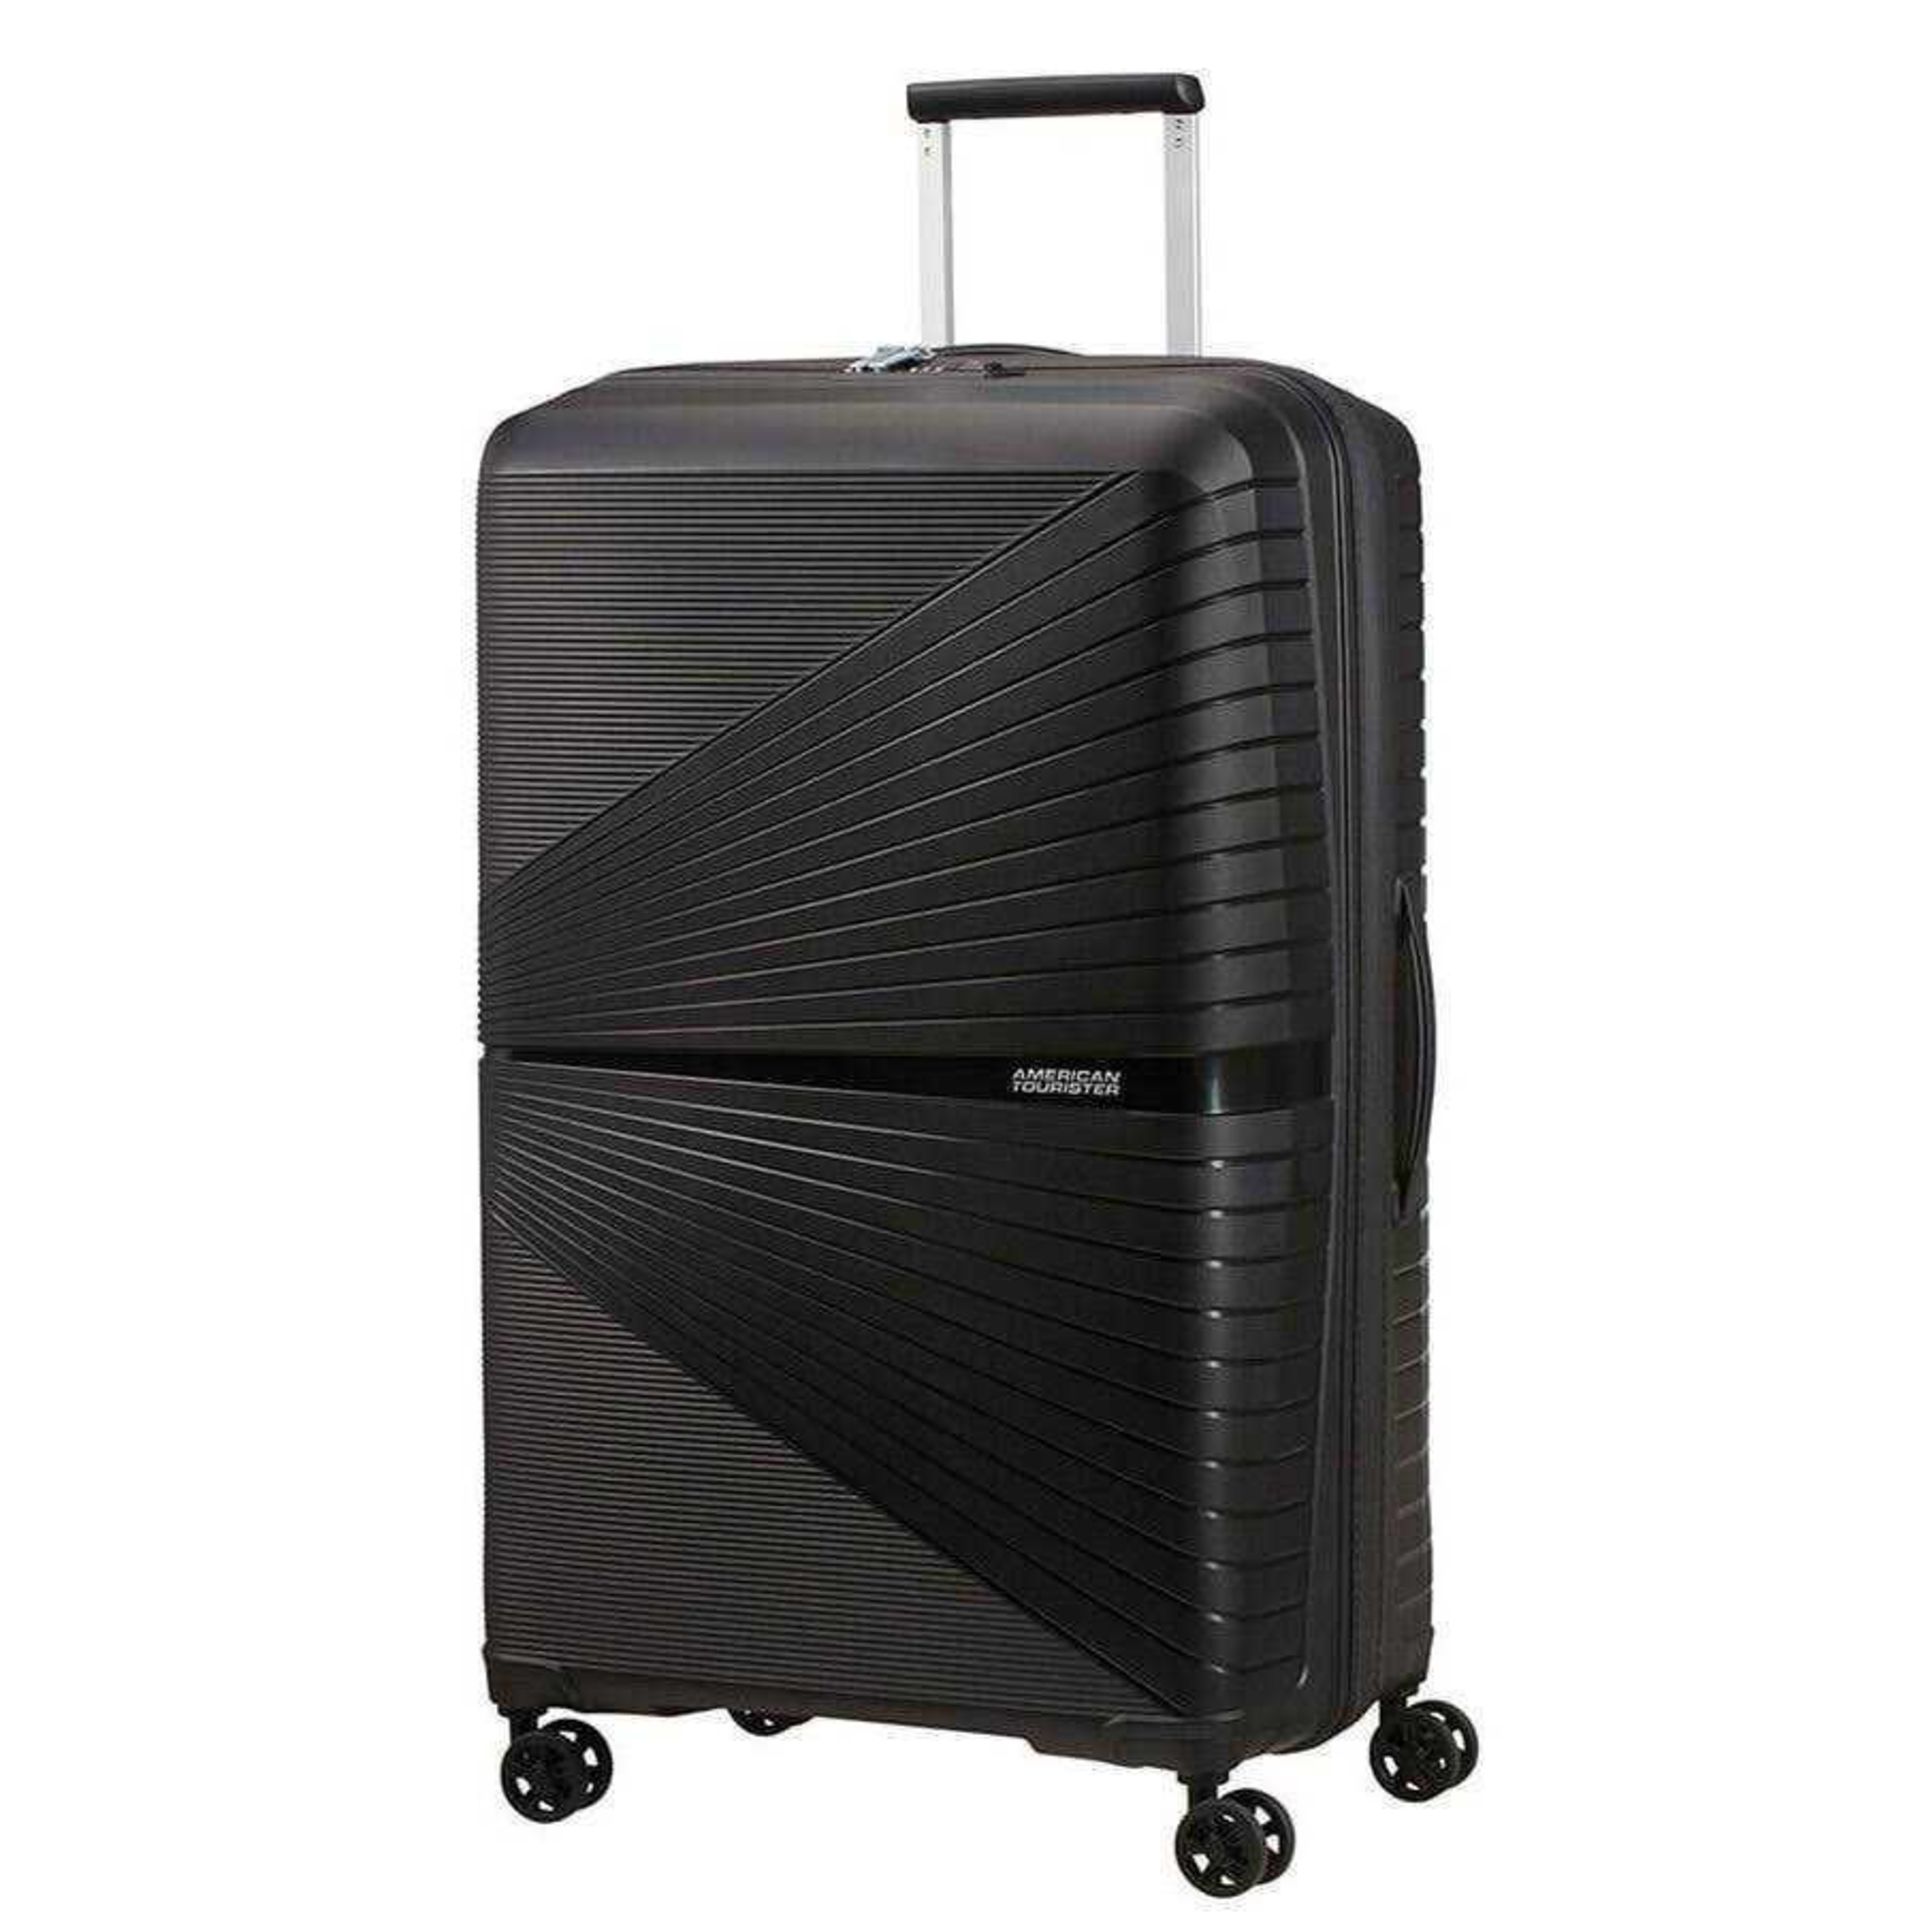 Rrp £160 American Tourister Onyx Black 4 Wheel Spin Travel Suitcase